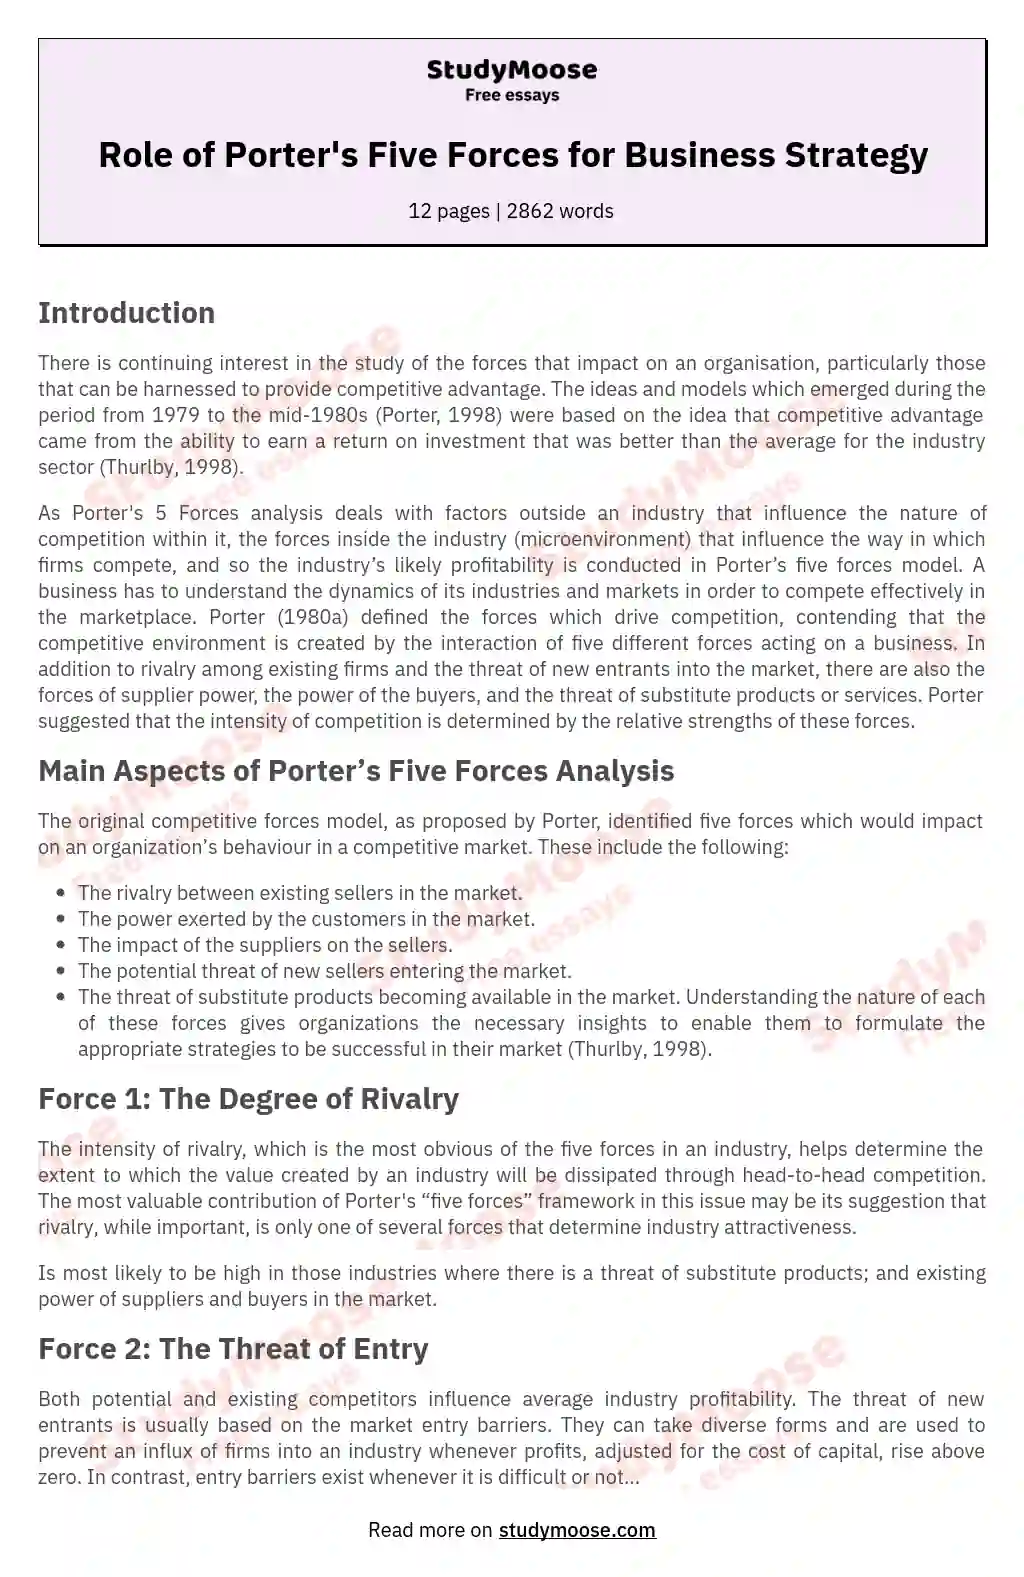 Role of Porter's Five Forces for Business Strategy